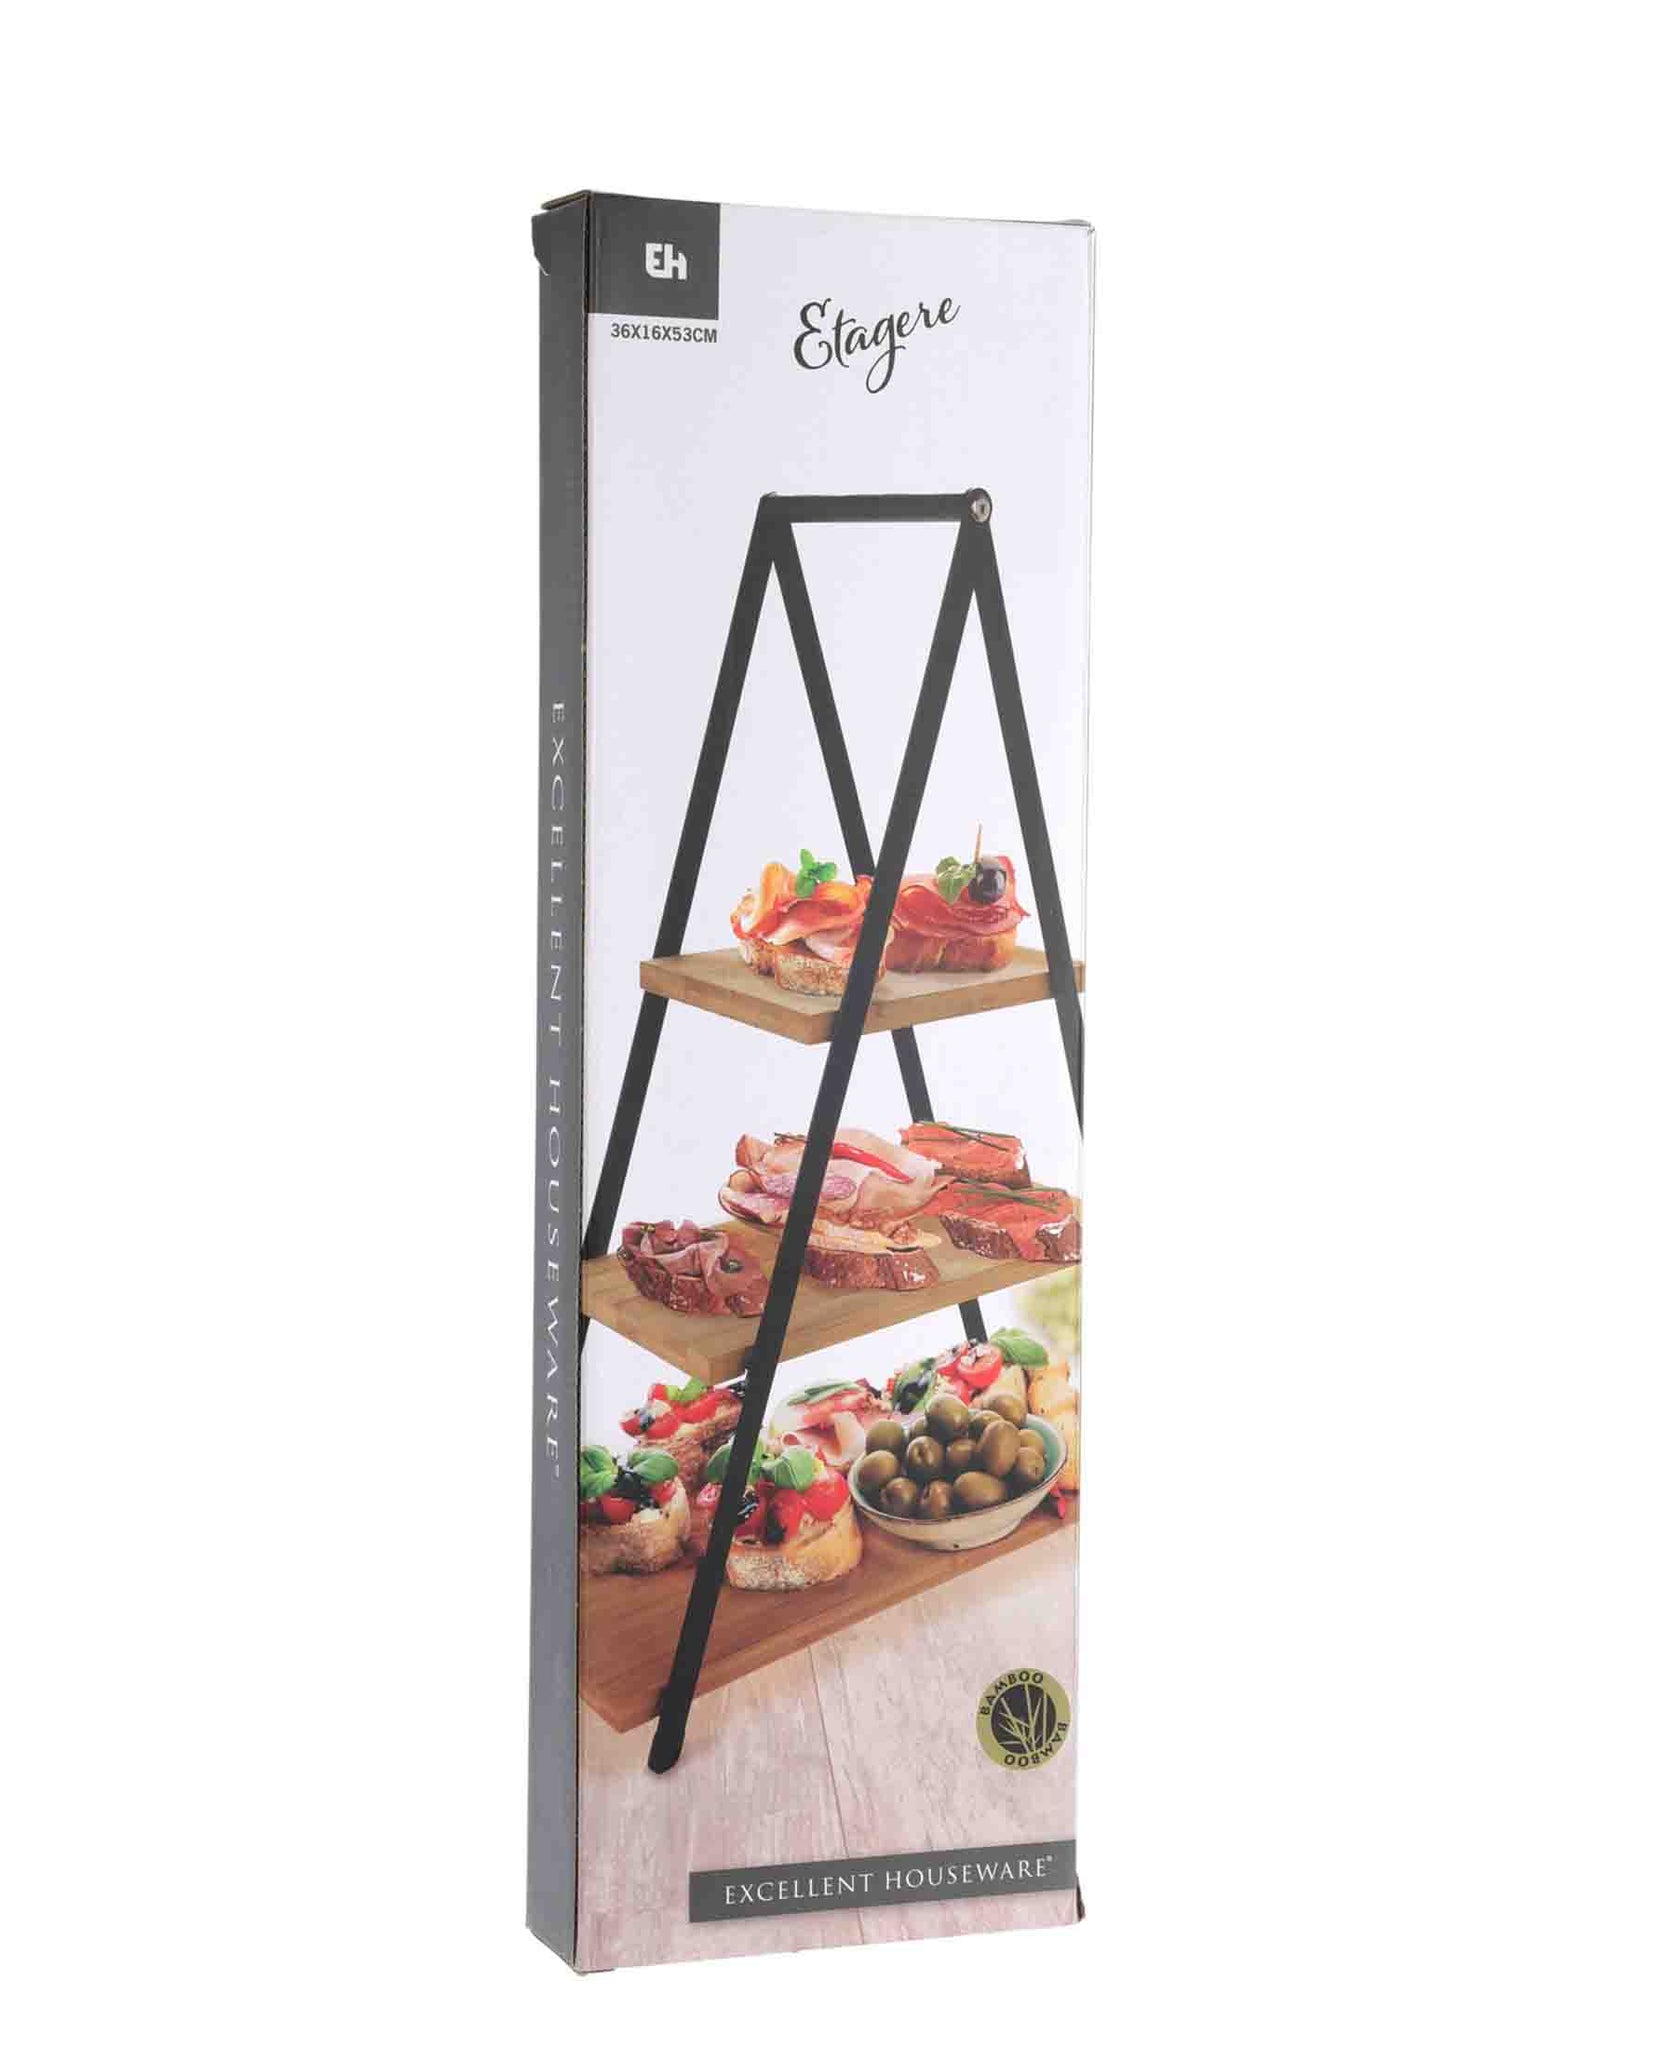 Excellent Houseware 3 Tier Pyramid Food Stand - Black